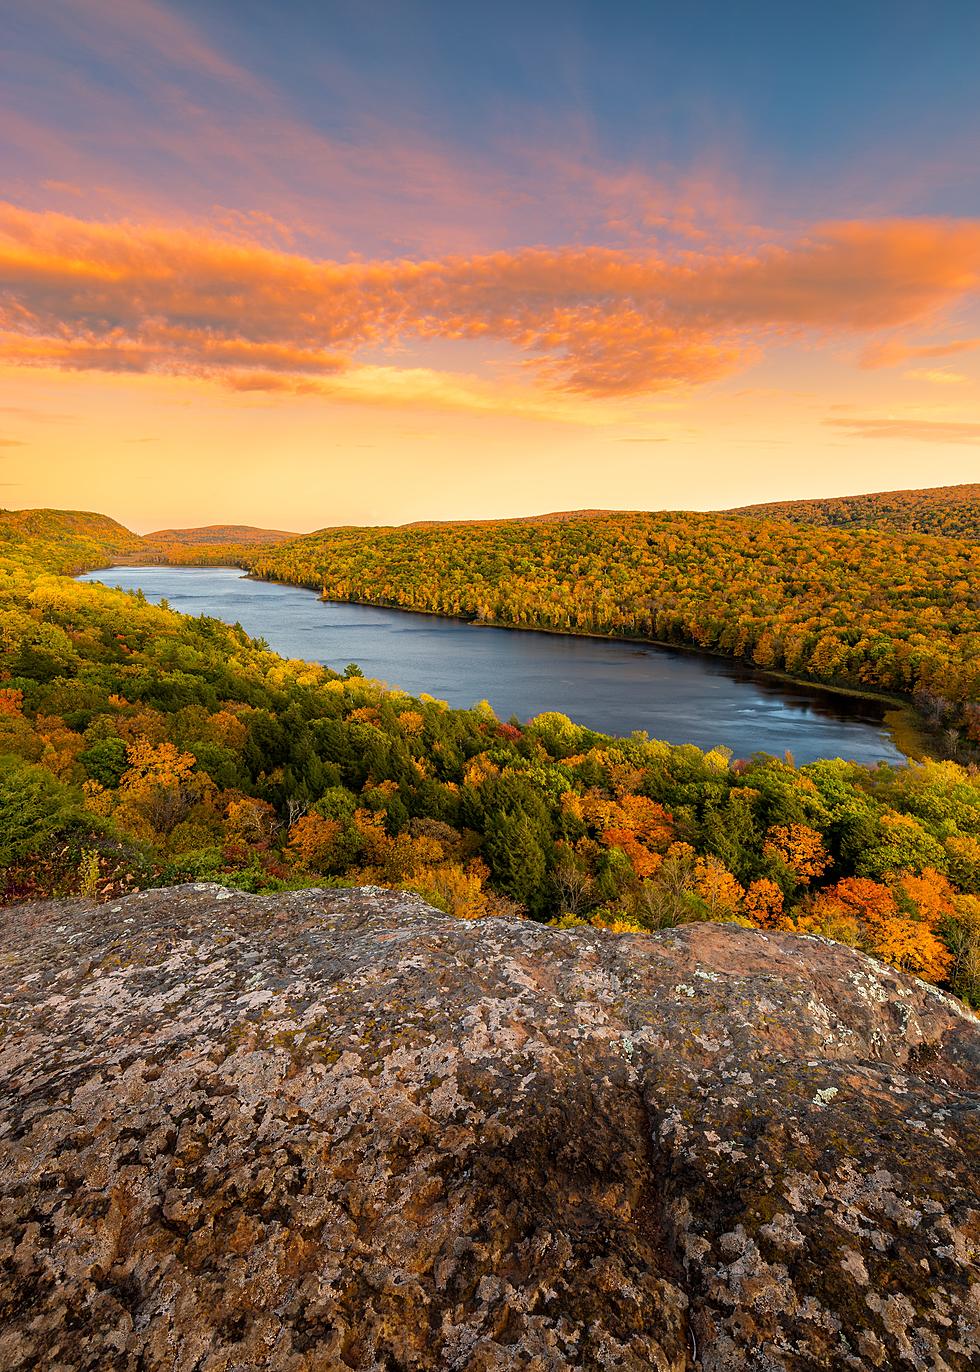 Minnesota Has 3 Of The Top 140 Fall Foliage Drives In The US!